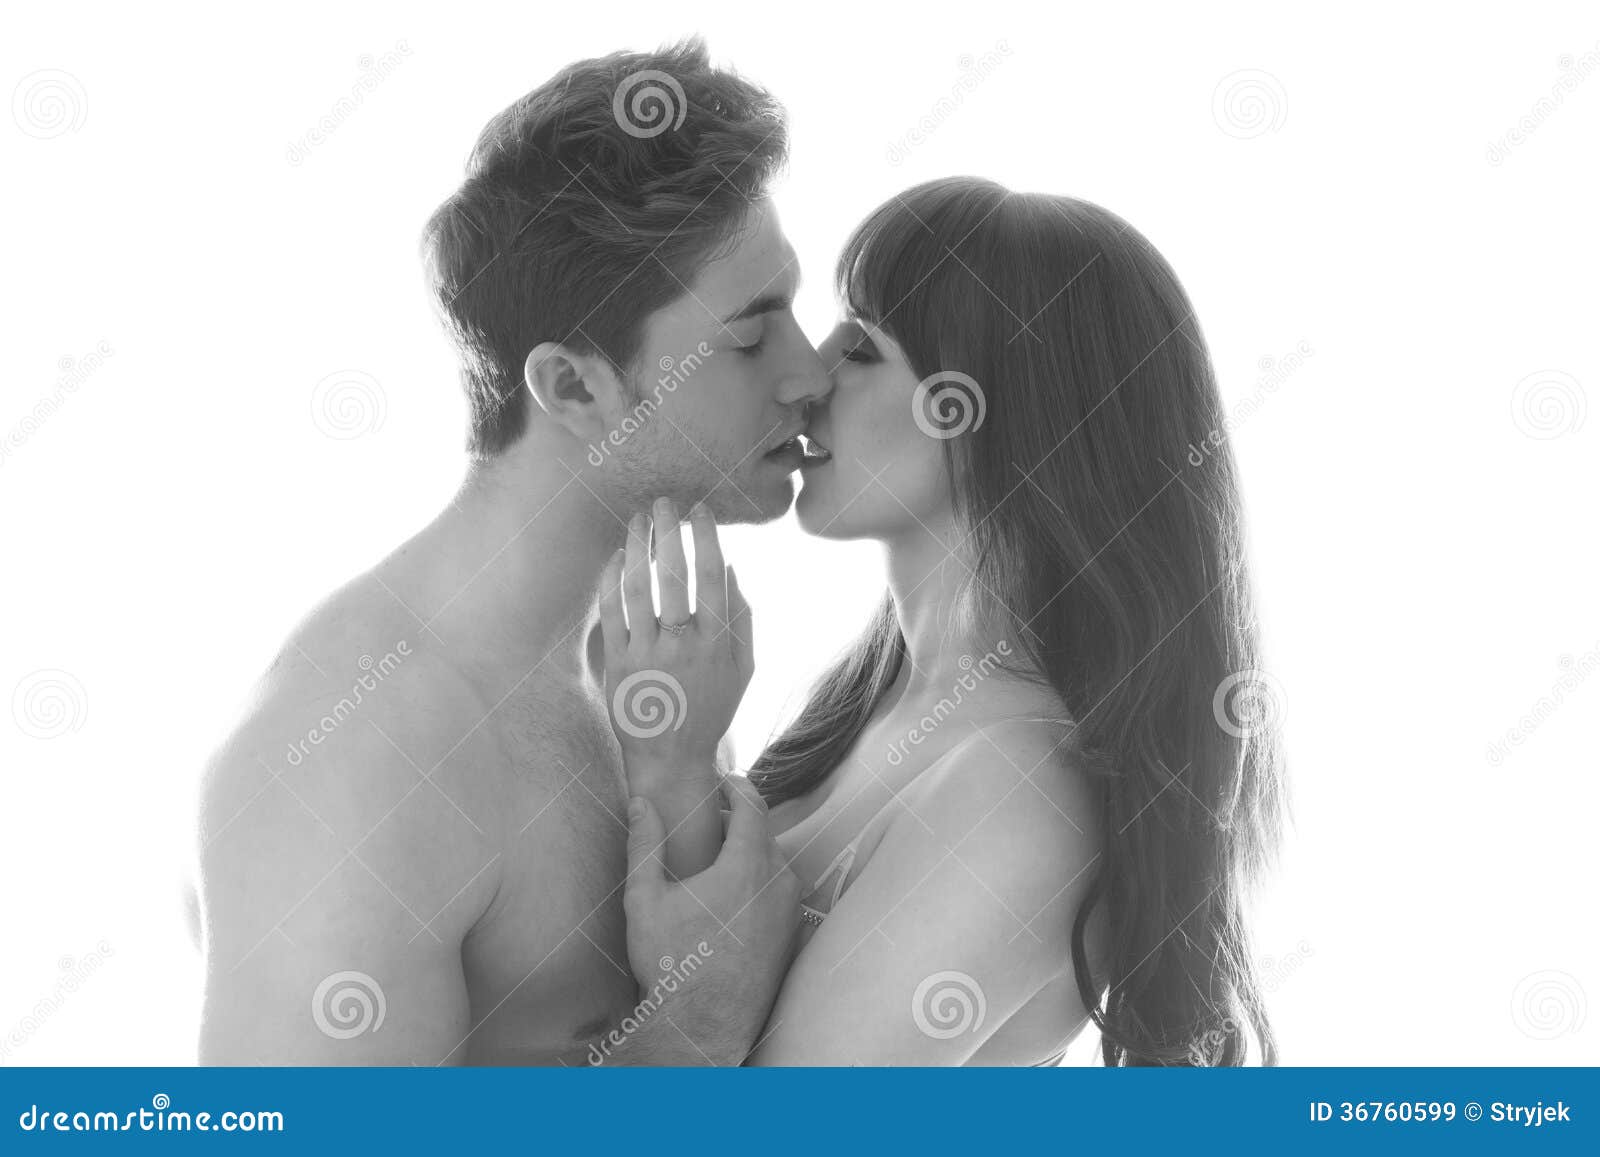 Romantic Nude Young Couple Kissing Stock Image - Image of kissing, profile:  36760599